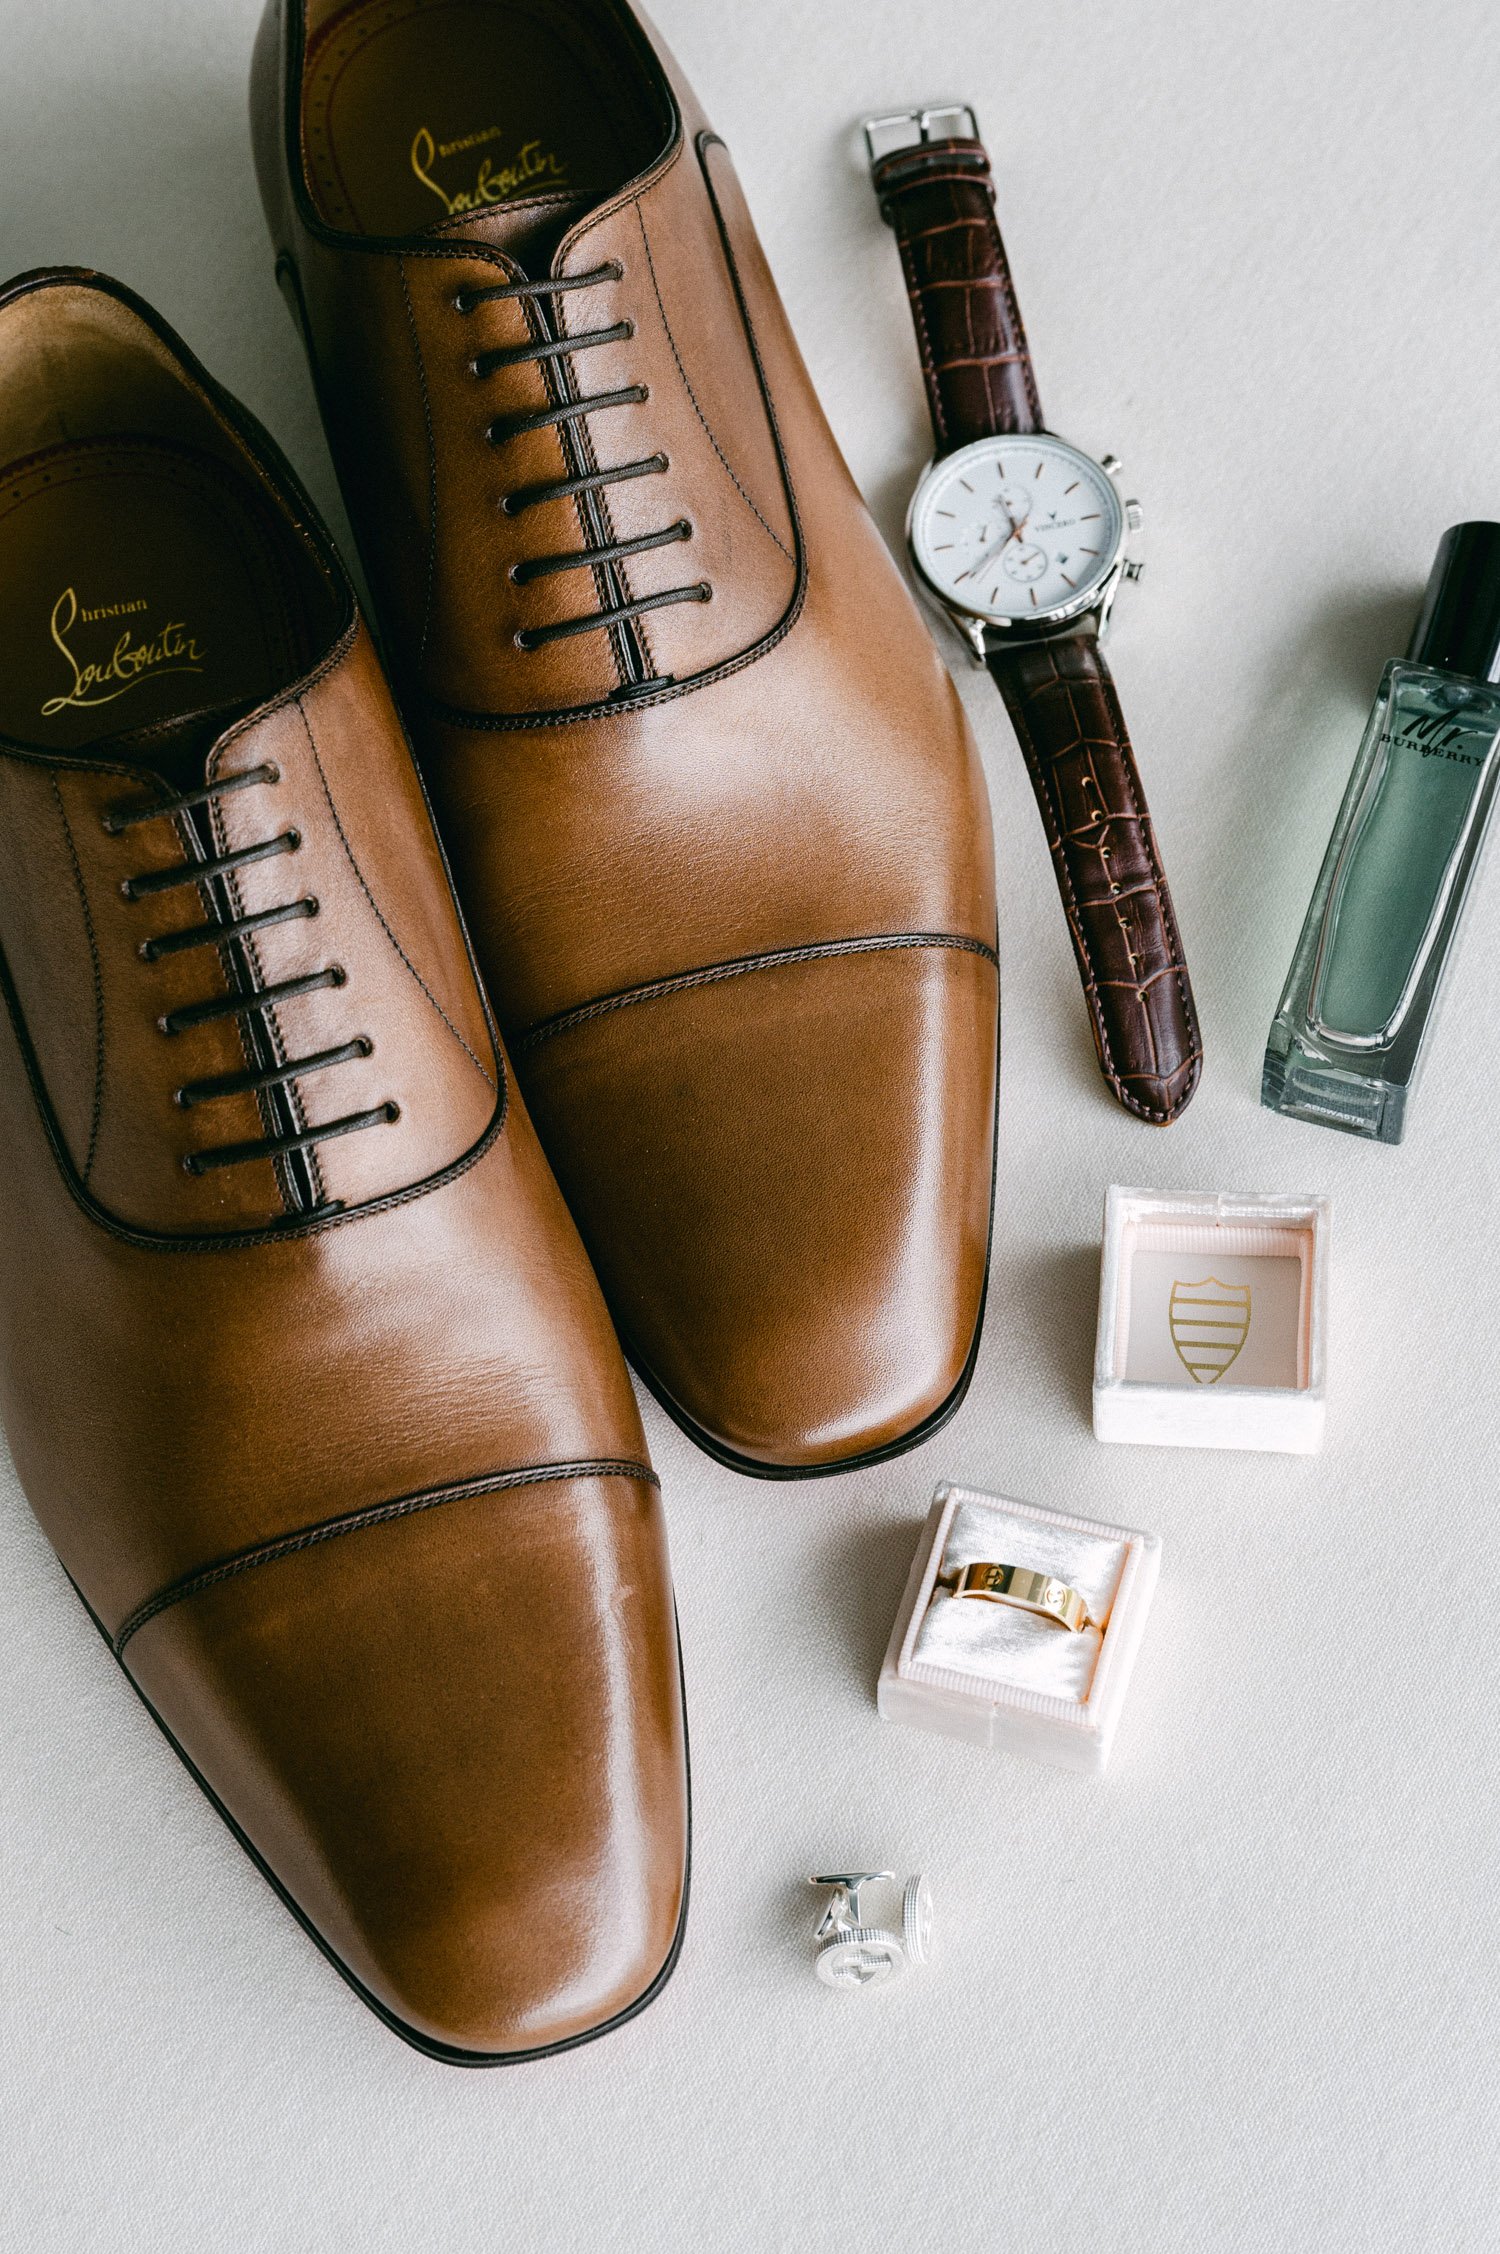 Edgewood Tahoe wedding photos, photo of groom's louis vuitton shoes and cologne 